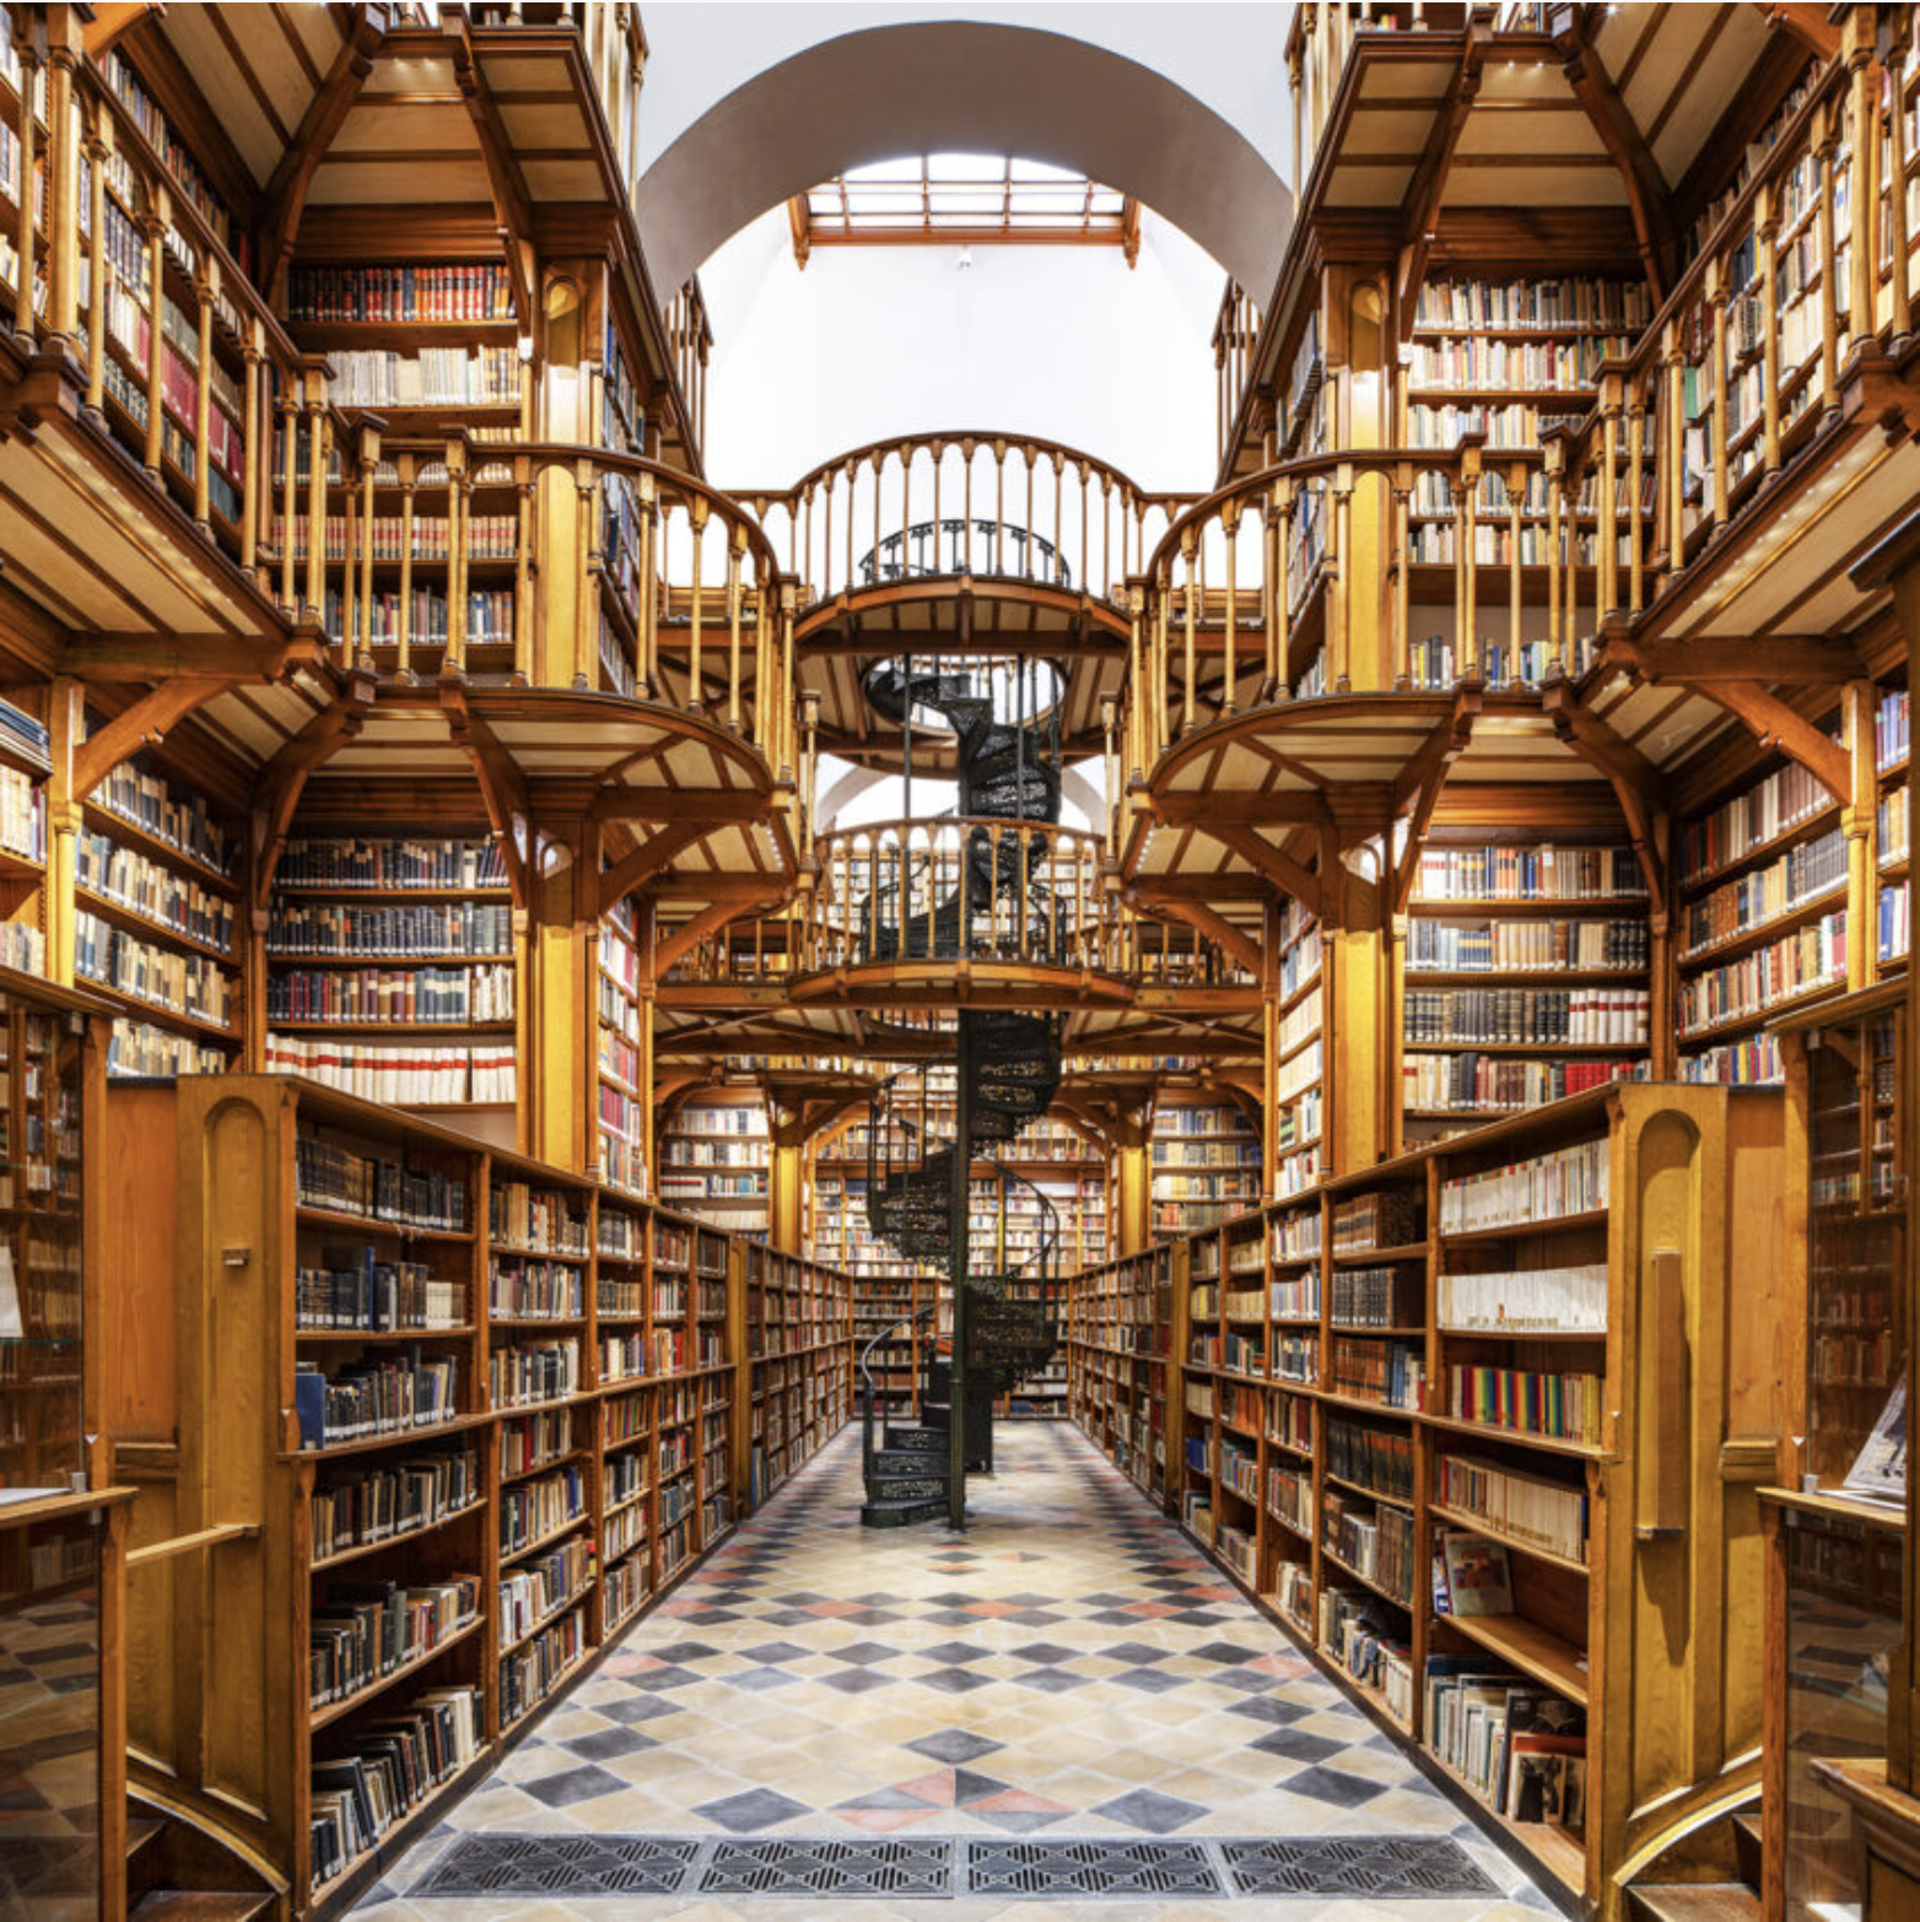 Abbey Library, Maria Aach, Germany by Reinhard Gorner